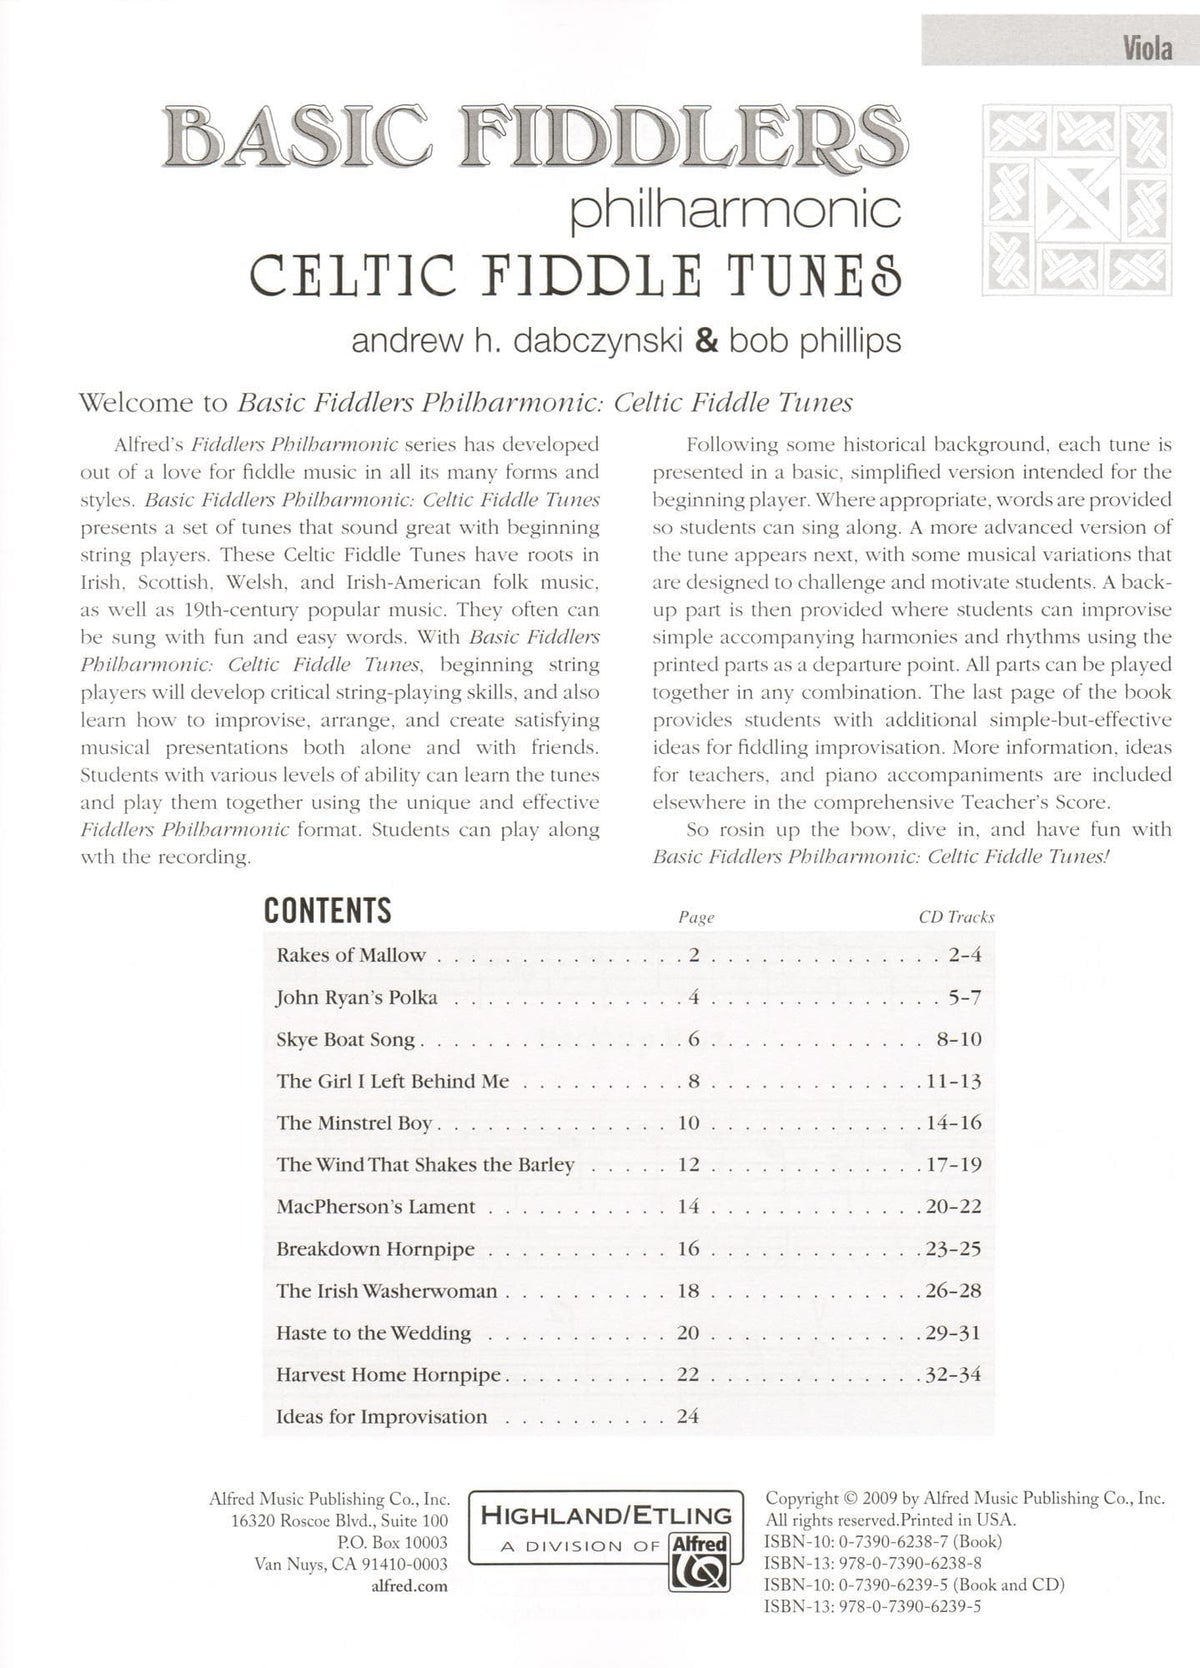 Basic Fiddlers Philharmonic - Celtic Fiddle Tunes - Viola Book - by Dabczynski & Phillips - Alfred Publishing